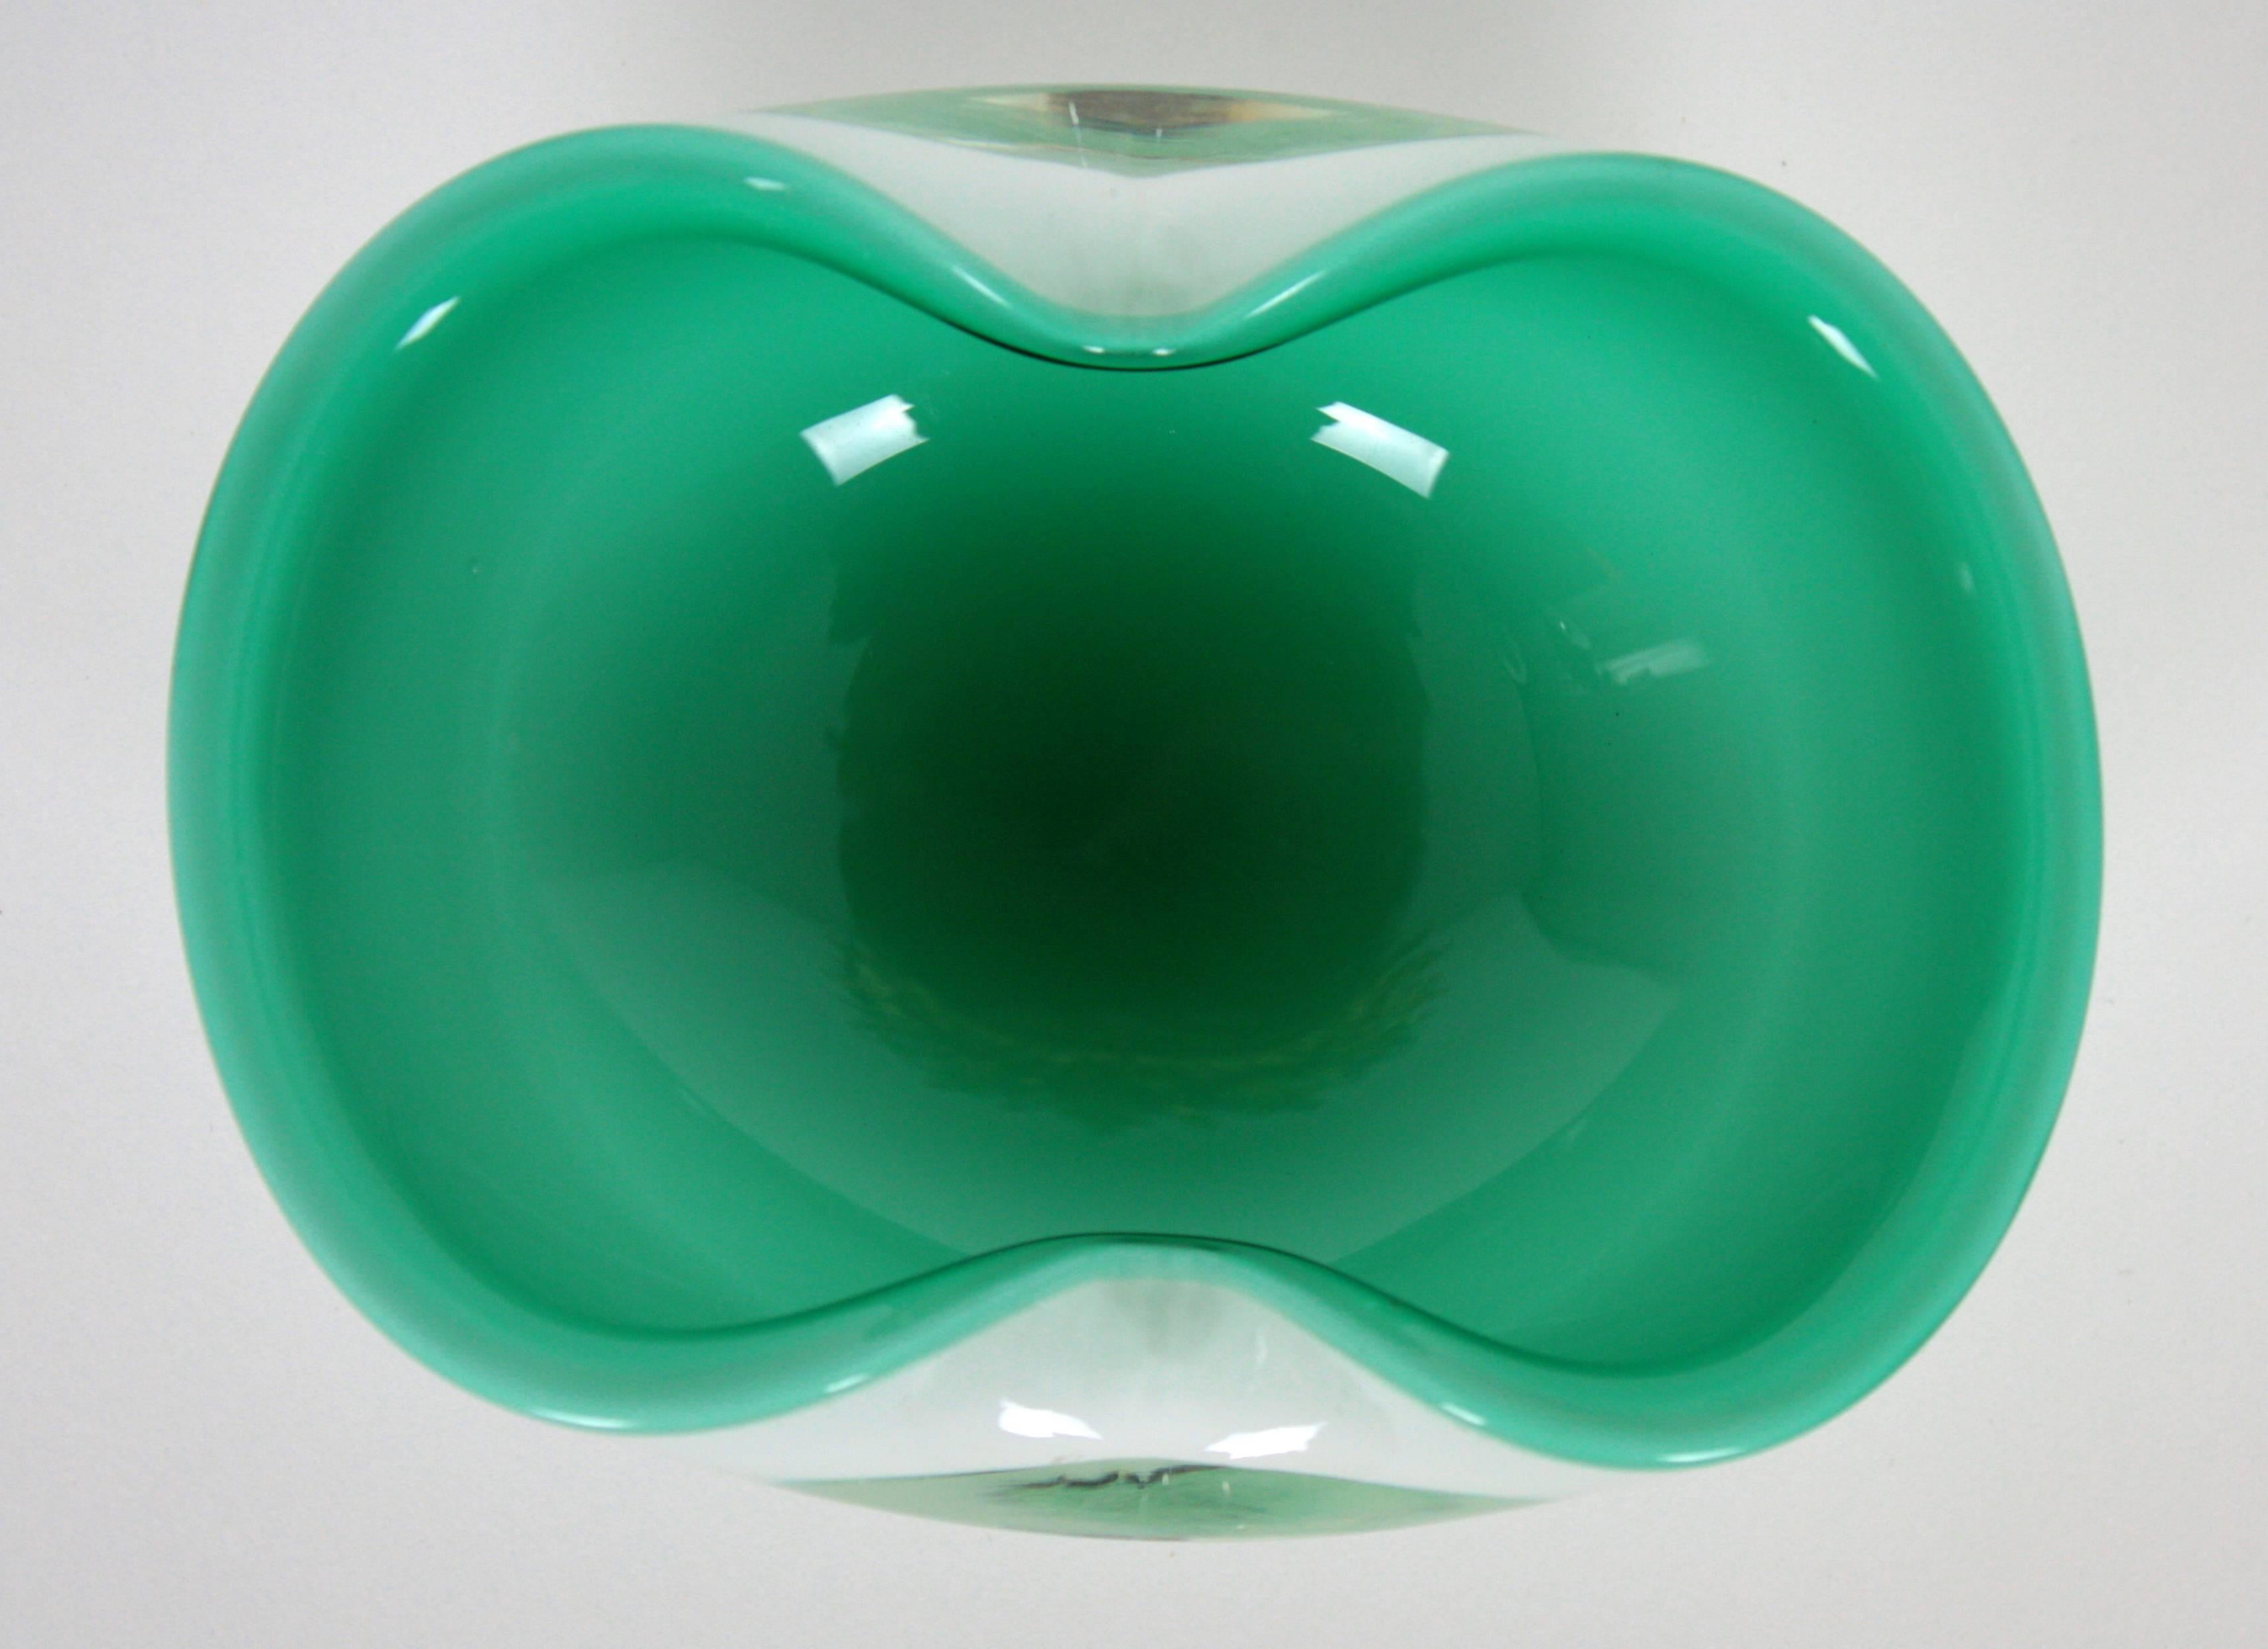 Amazing Murano glass bowl in a beautiful aqua green color and white glass cased into clear glass,
Italy, 1950s-1960s.